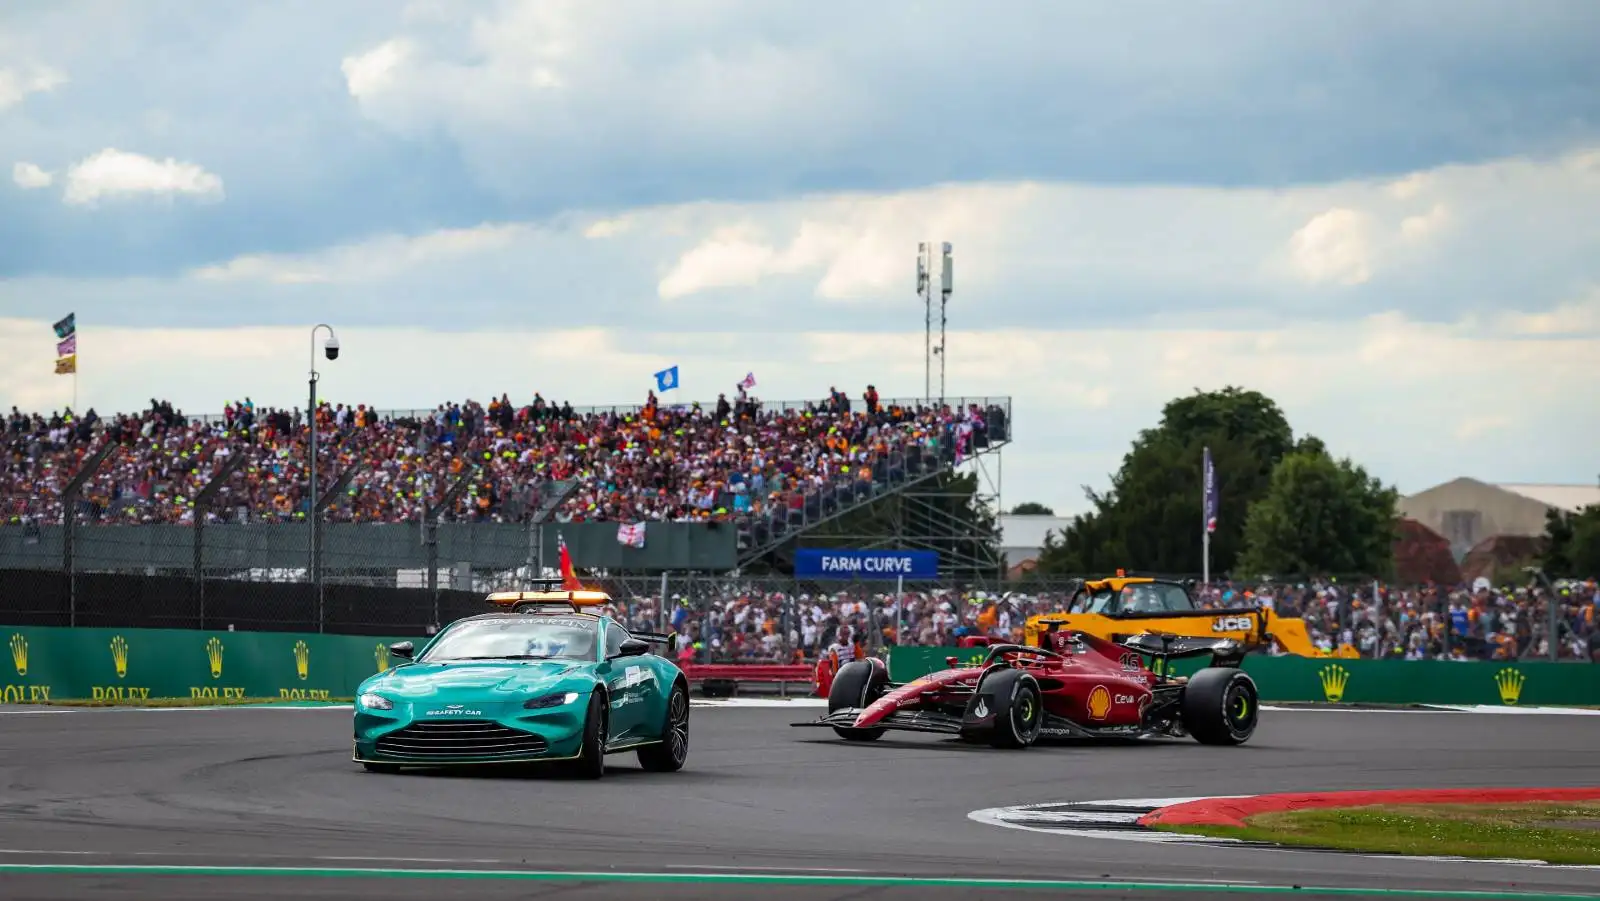 Charles Leclerc's Ferrari behind the Safety Car. Silverstone July 2022.